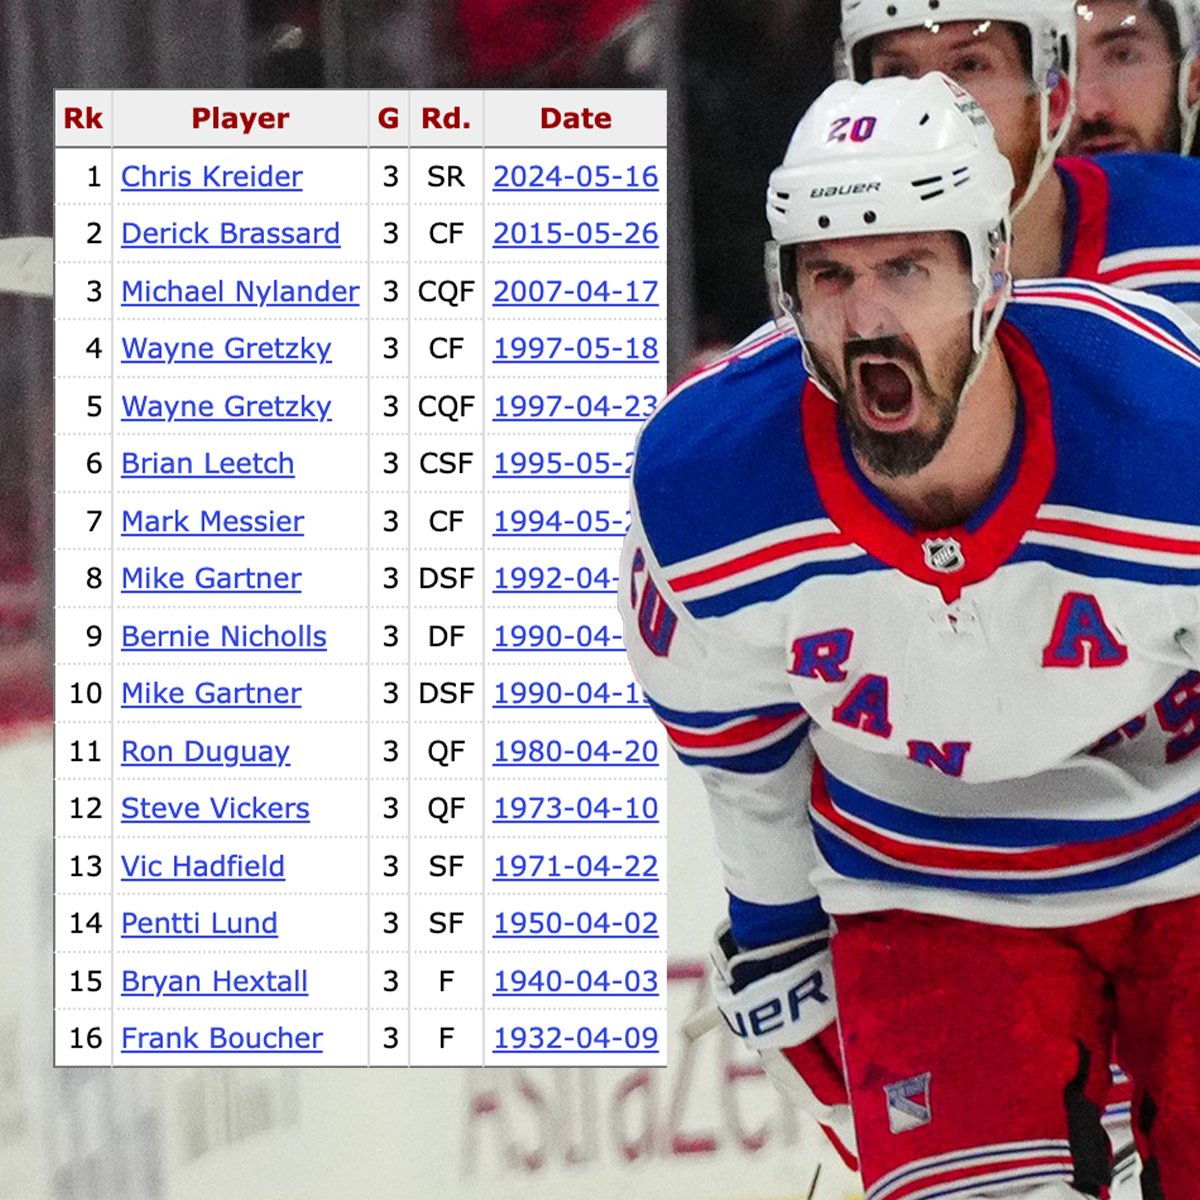 Chris Kreider is the third @NYRangers player in the last 25 years to have a hat trick in the playoffs. #NHL | #NYR